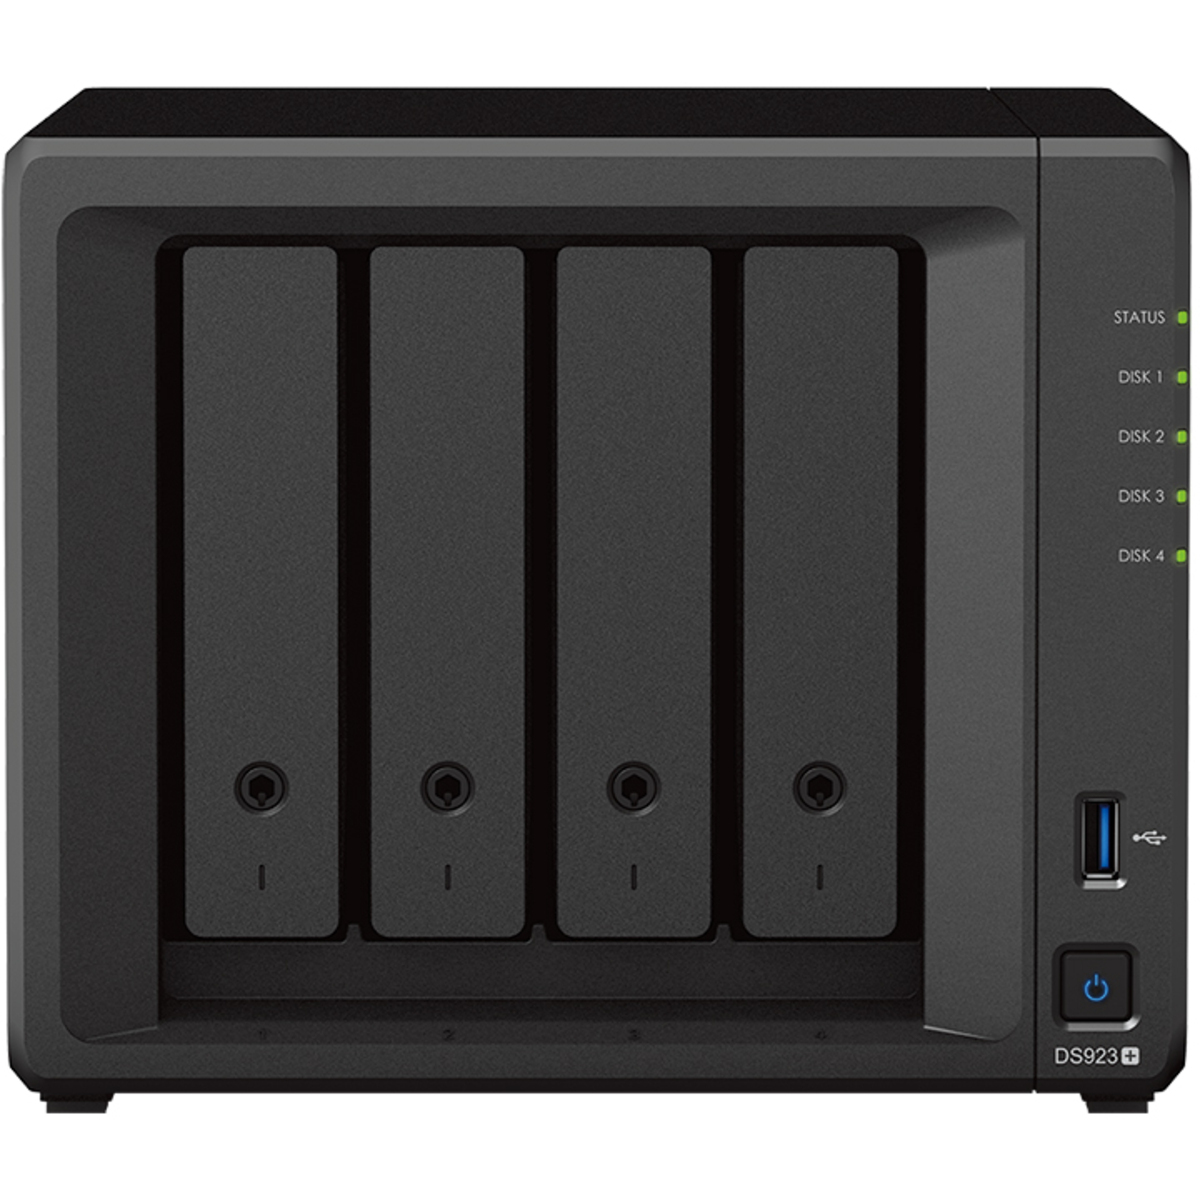 buy Synology DiskStation DS923+ 80tb Desktop NAS - Network Attached Storage Device 4x20000gb Seagate IronWolf Pro ST20000NT001 3.5 7200rpm SATA 6Gb/s HDD NAS Class Drives Installed - Burn-In Tested - ON SALE - FREE RAM UPGRADE - nas headquarters buy network attached storage server device das new raid-5 free shipping simply usa christmas holiday black friday cyber monday week sale happening now! DiskStation DS923+